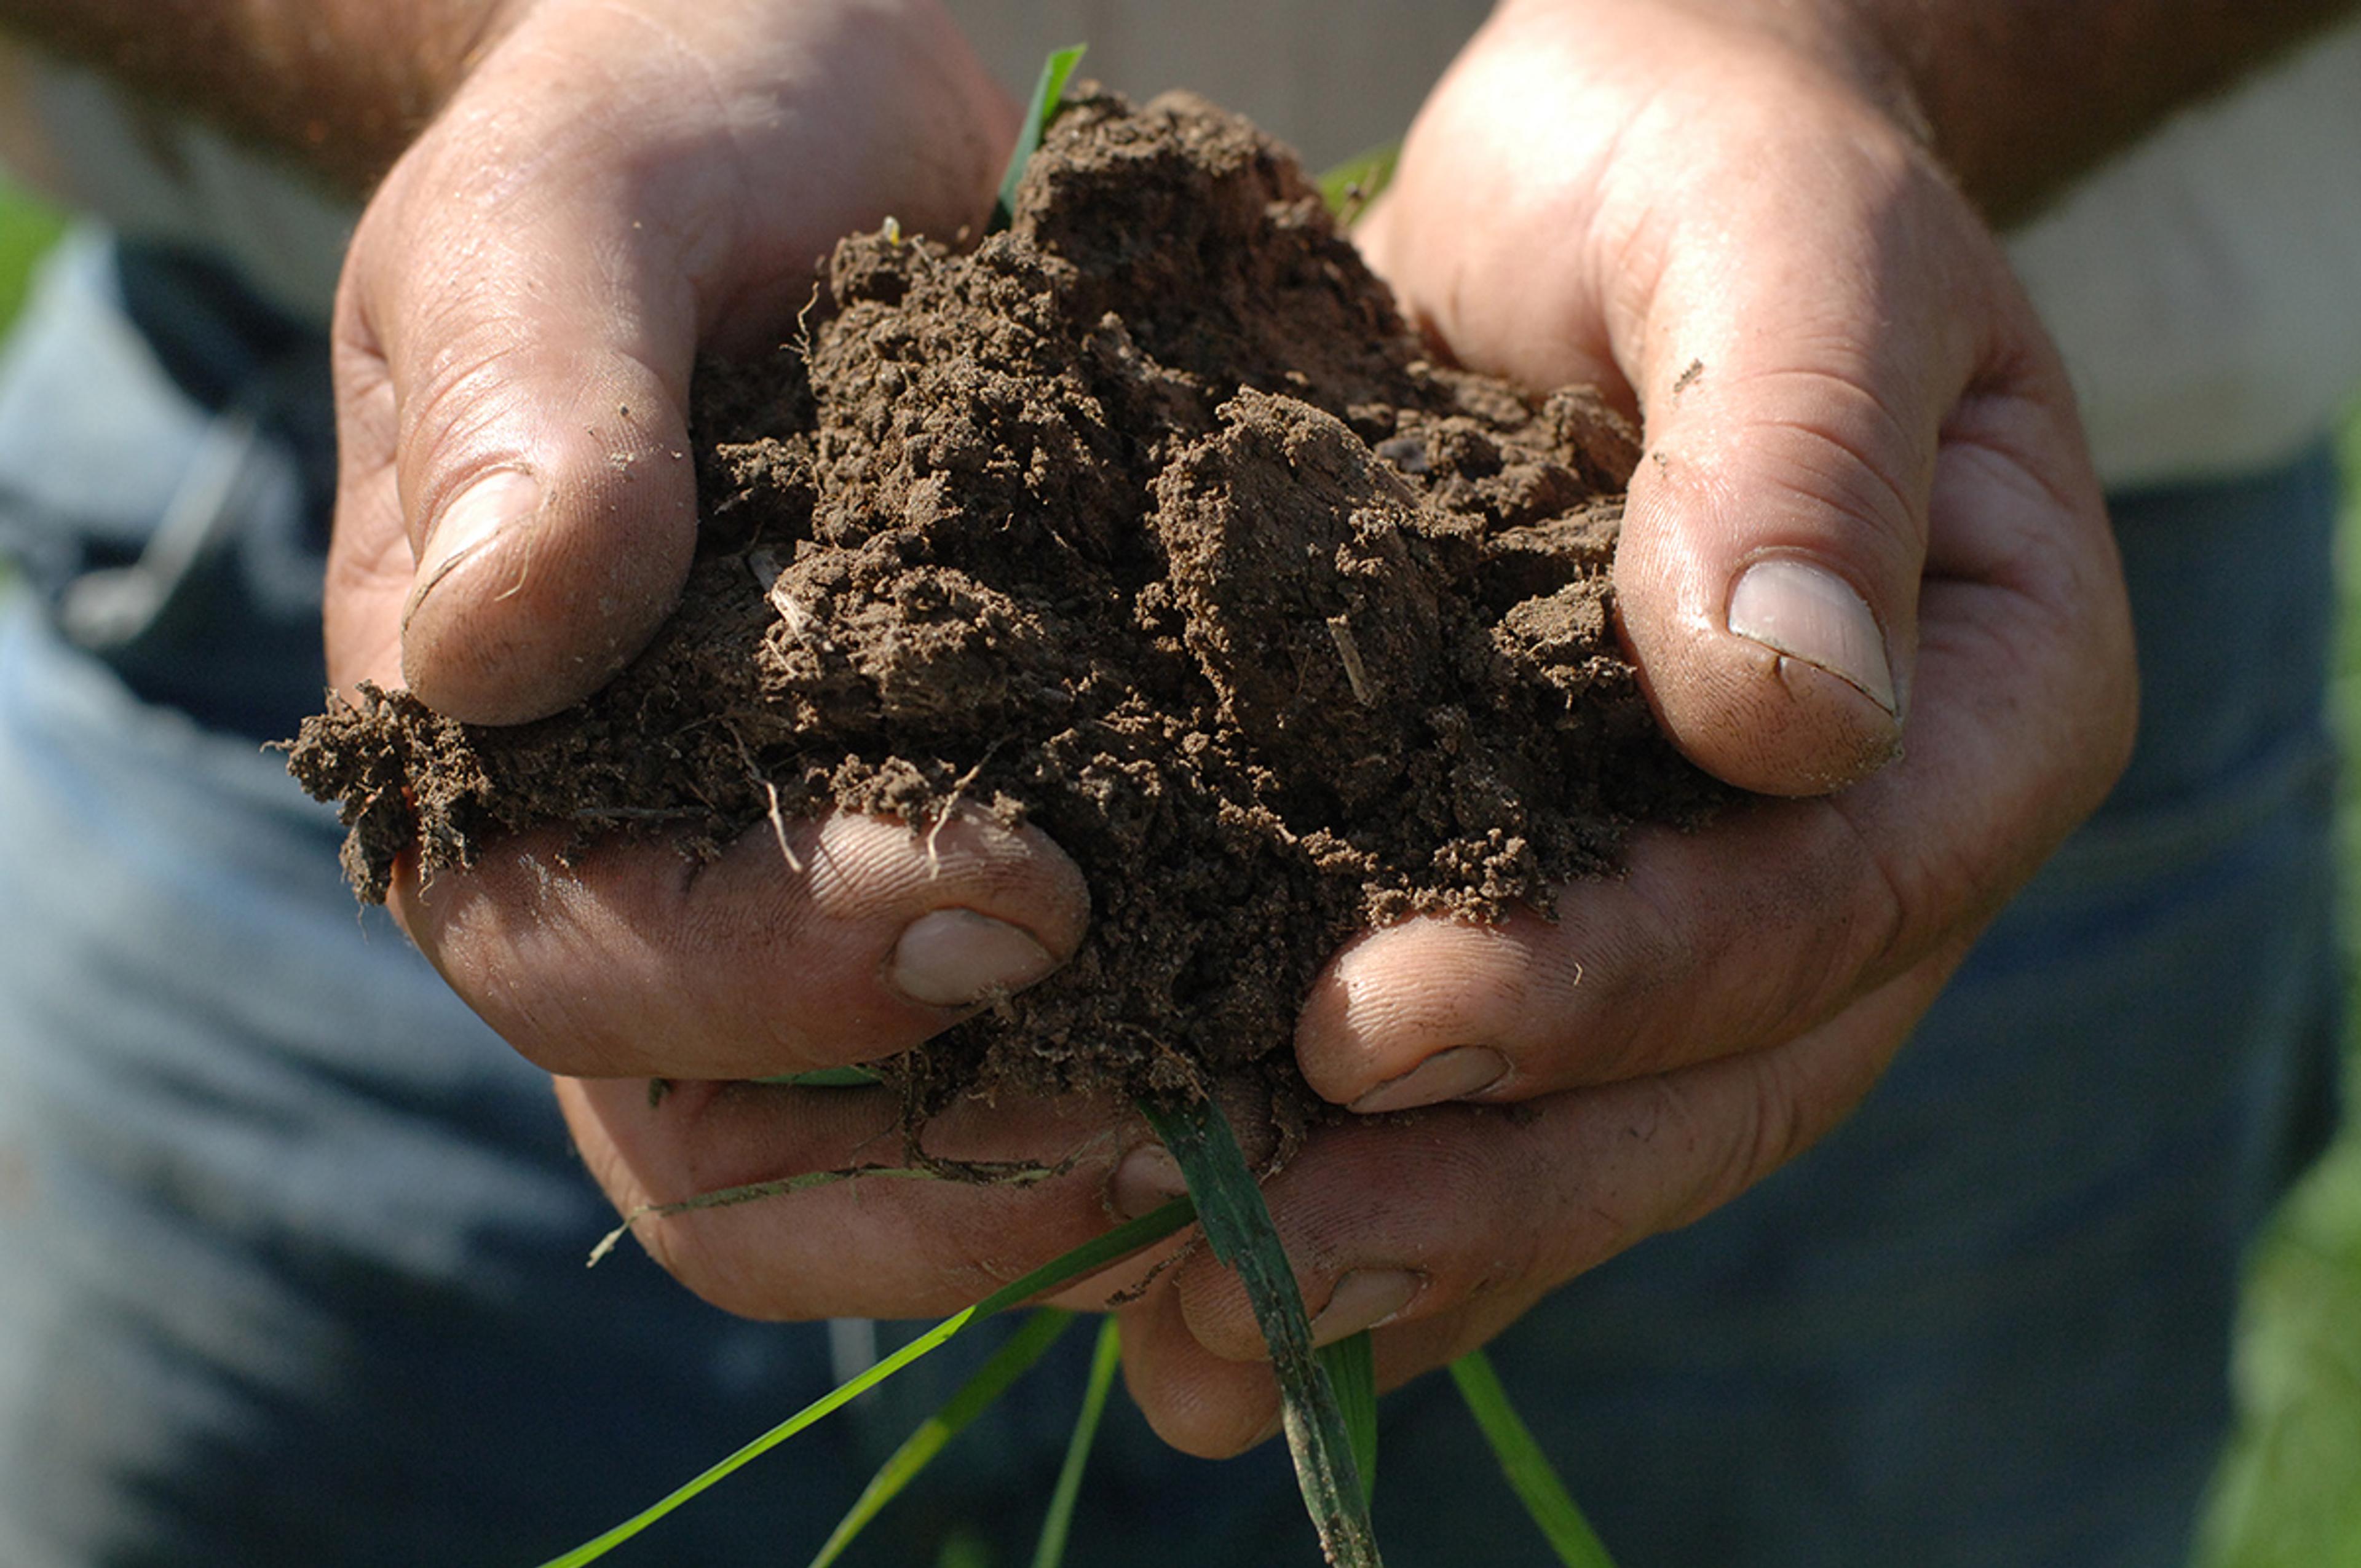 A man’s hands hold dark soil with a few pieces of grass sticking out.